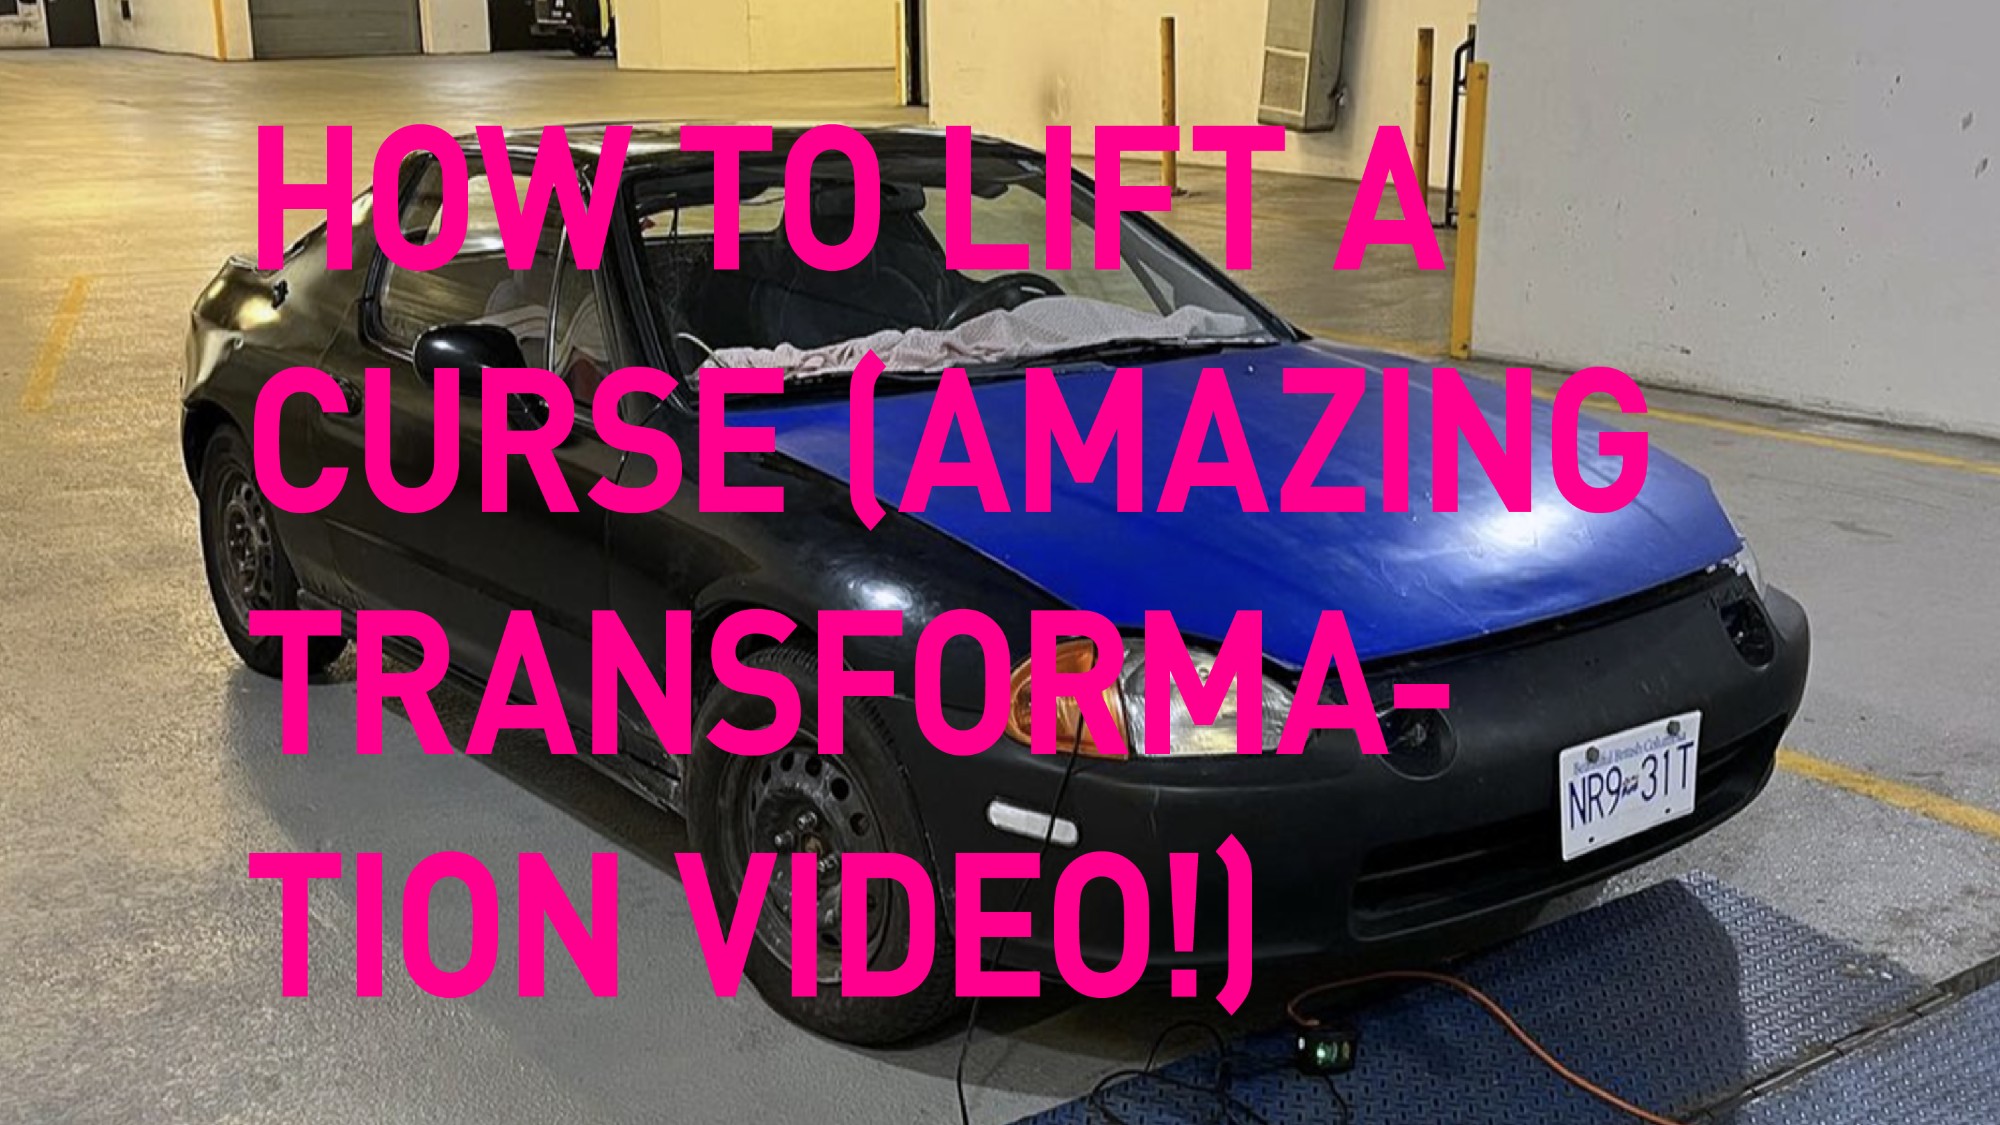 How to Lift a Curse (Amazing Transformation Video!)